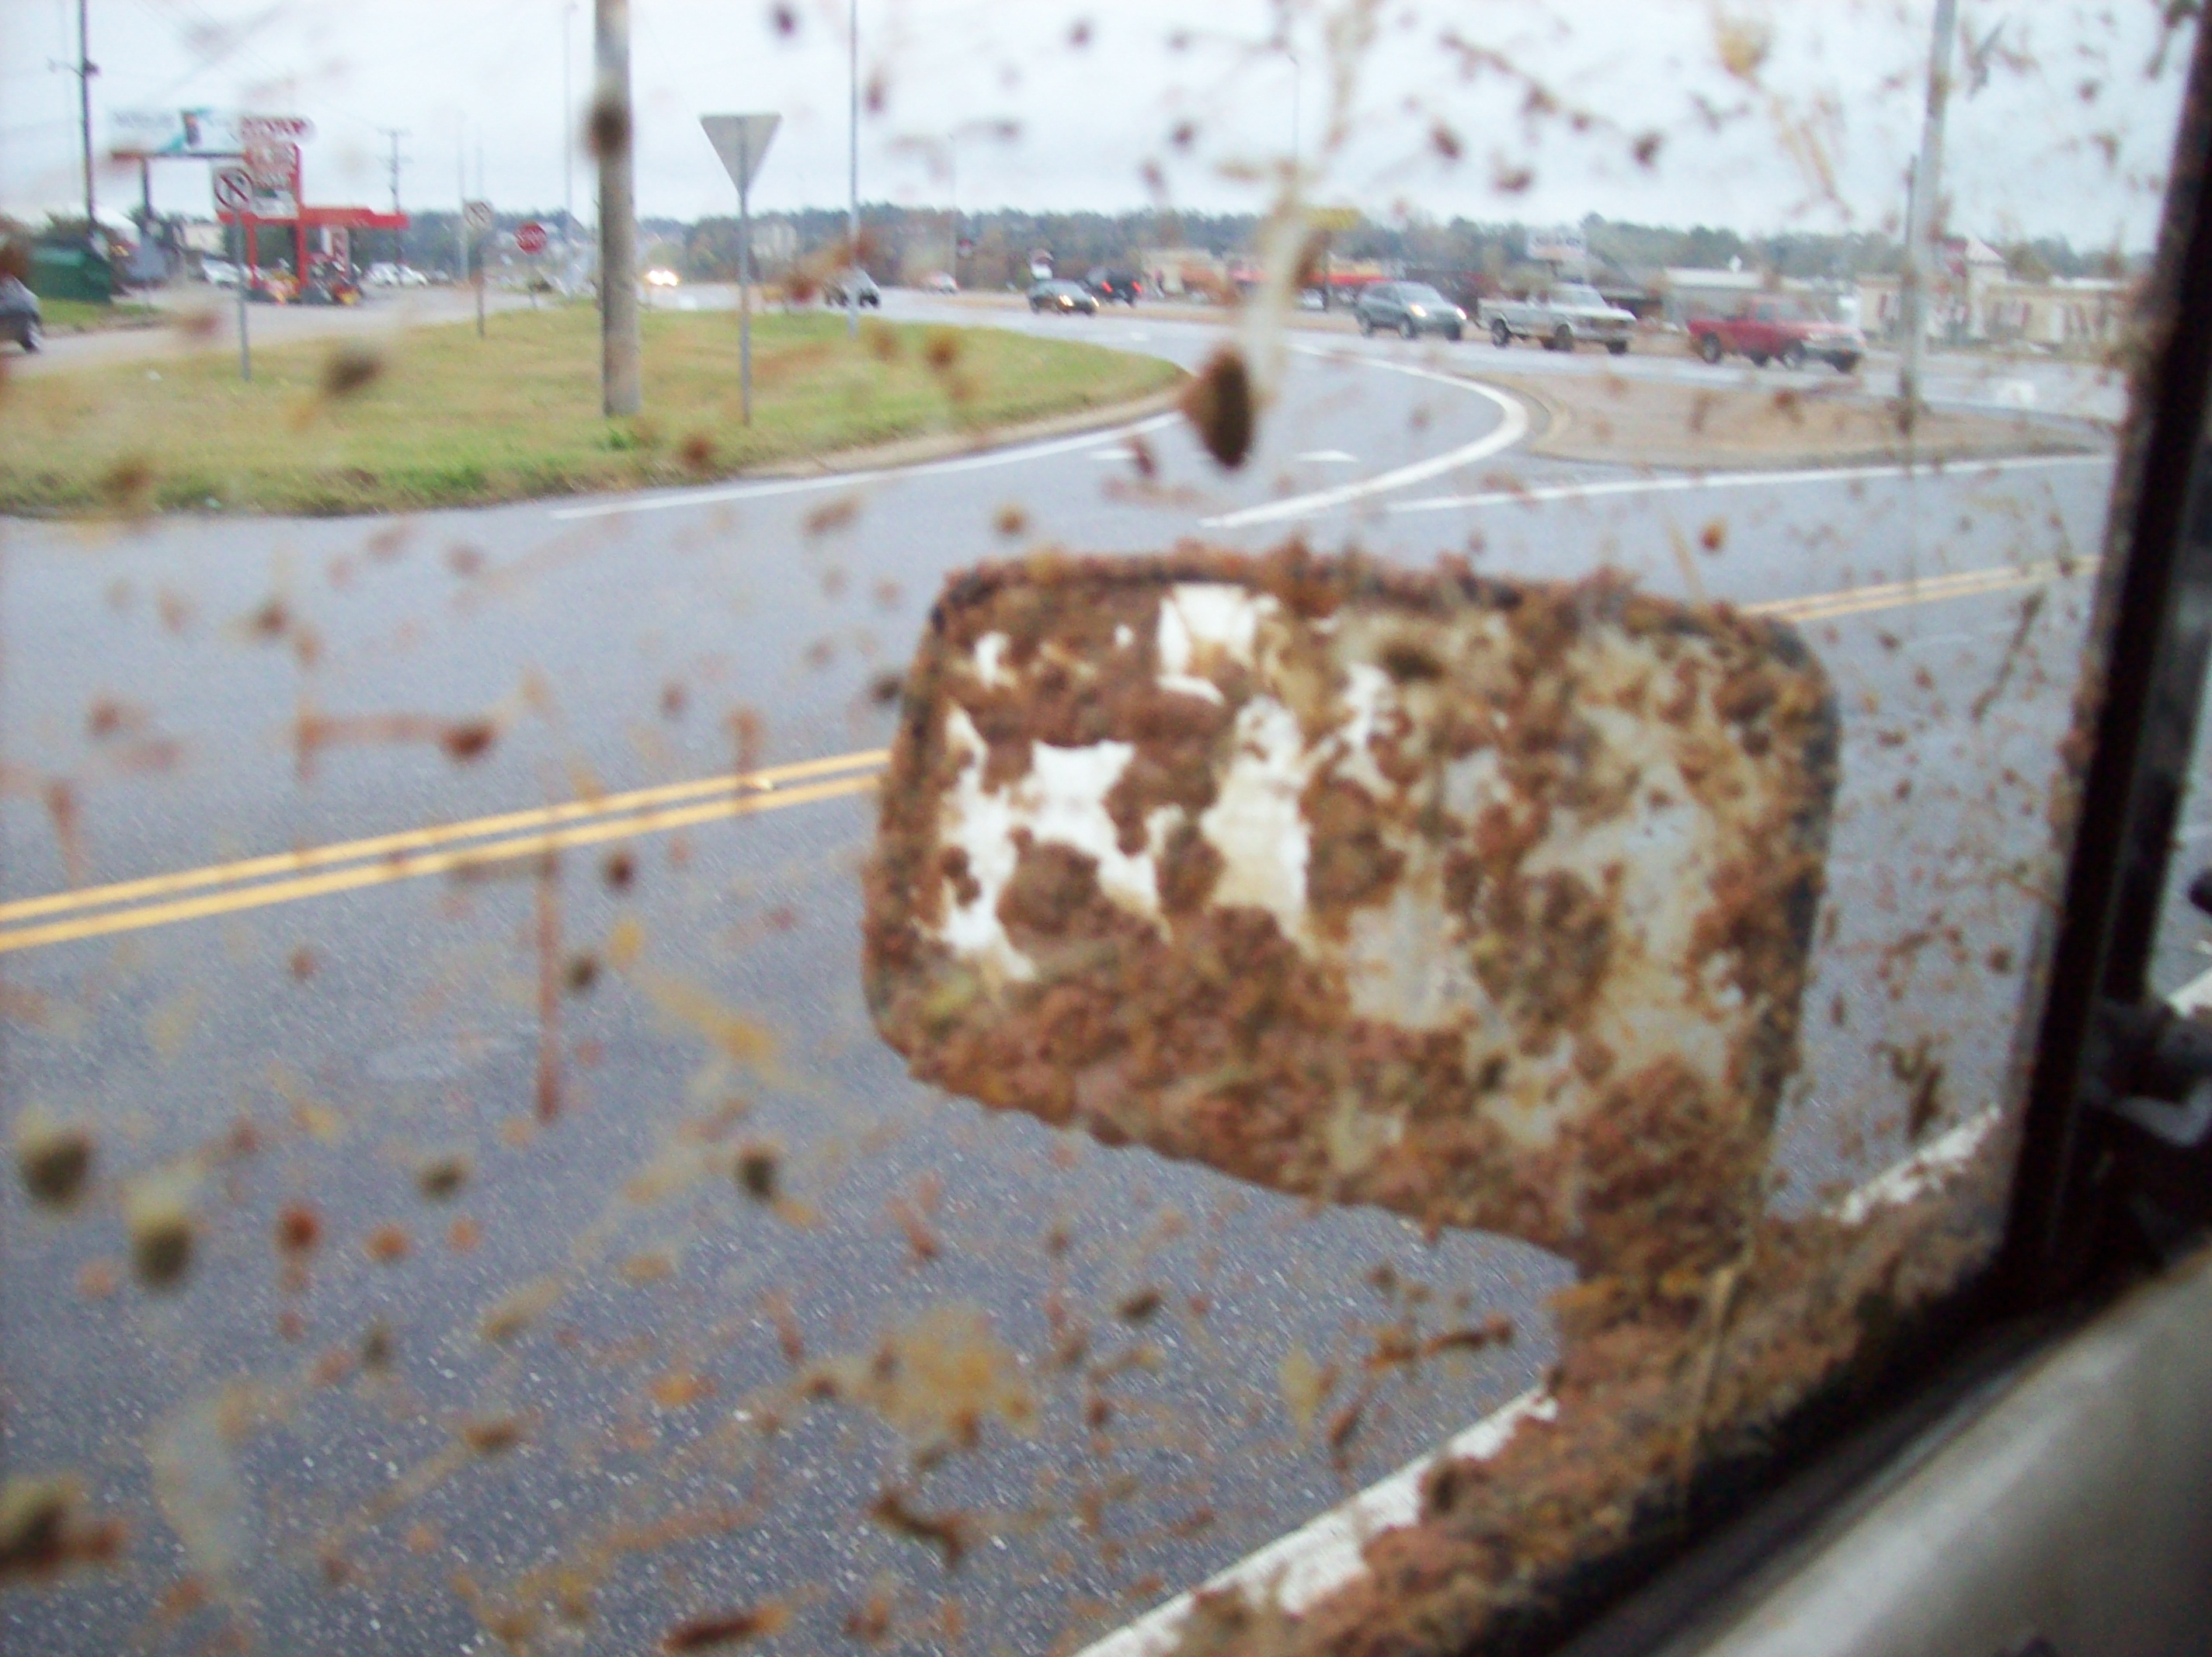 WARNING ! OBJECTS IN MIRROR MAY BE MUDDIER THAN THEY APPEAR!